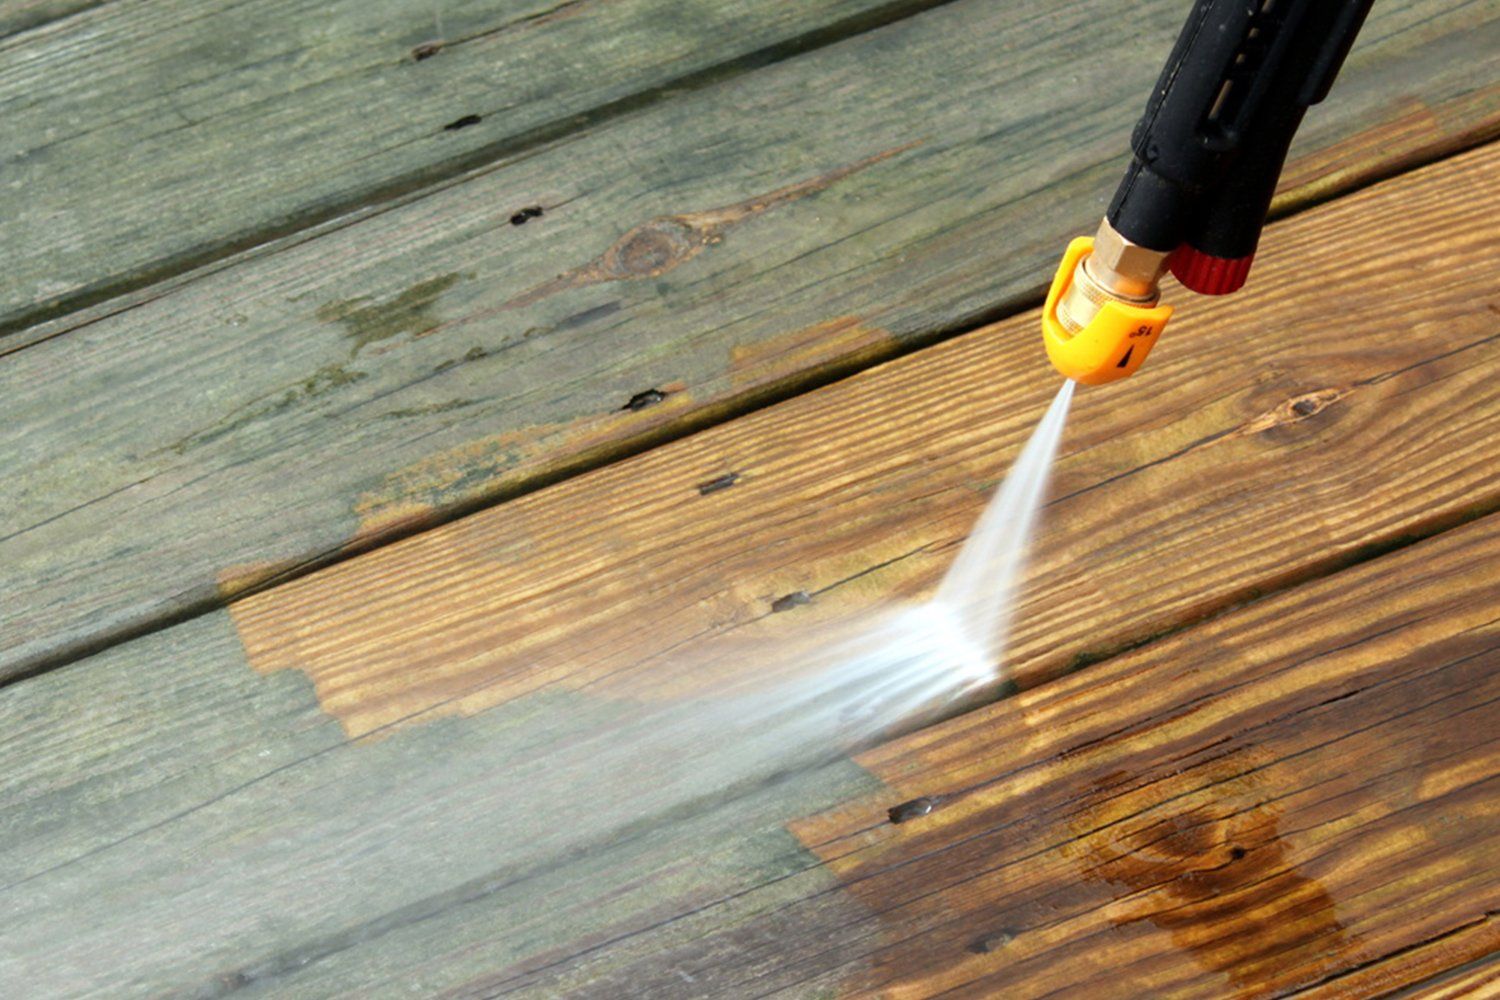 Pressure washing in the macon area